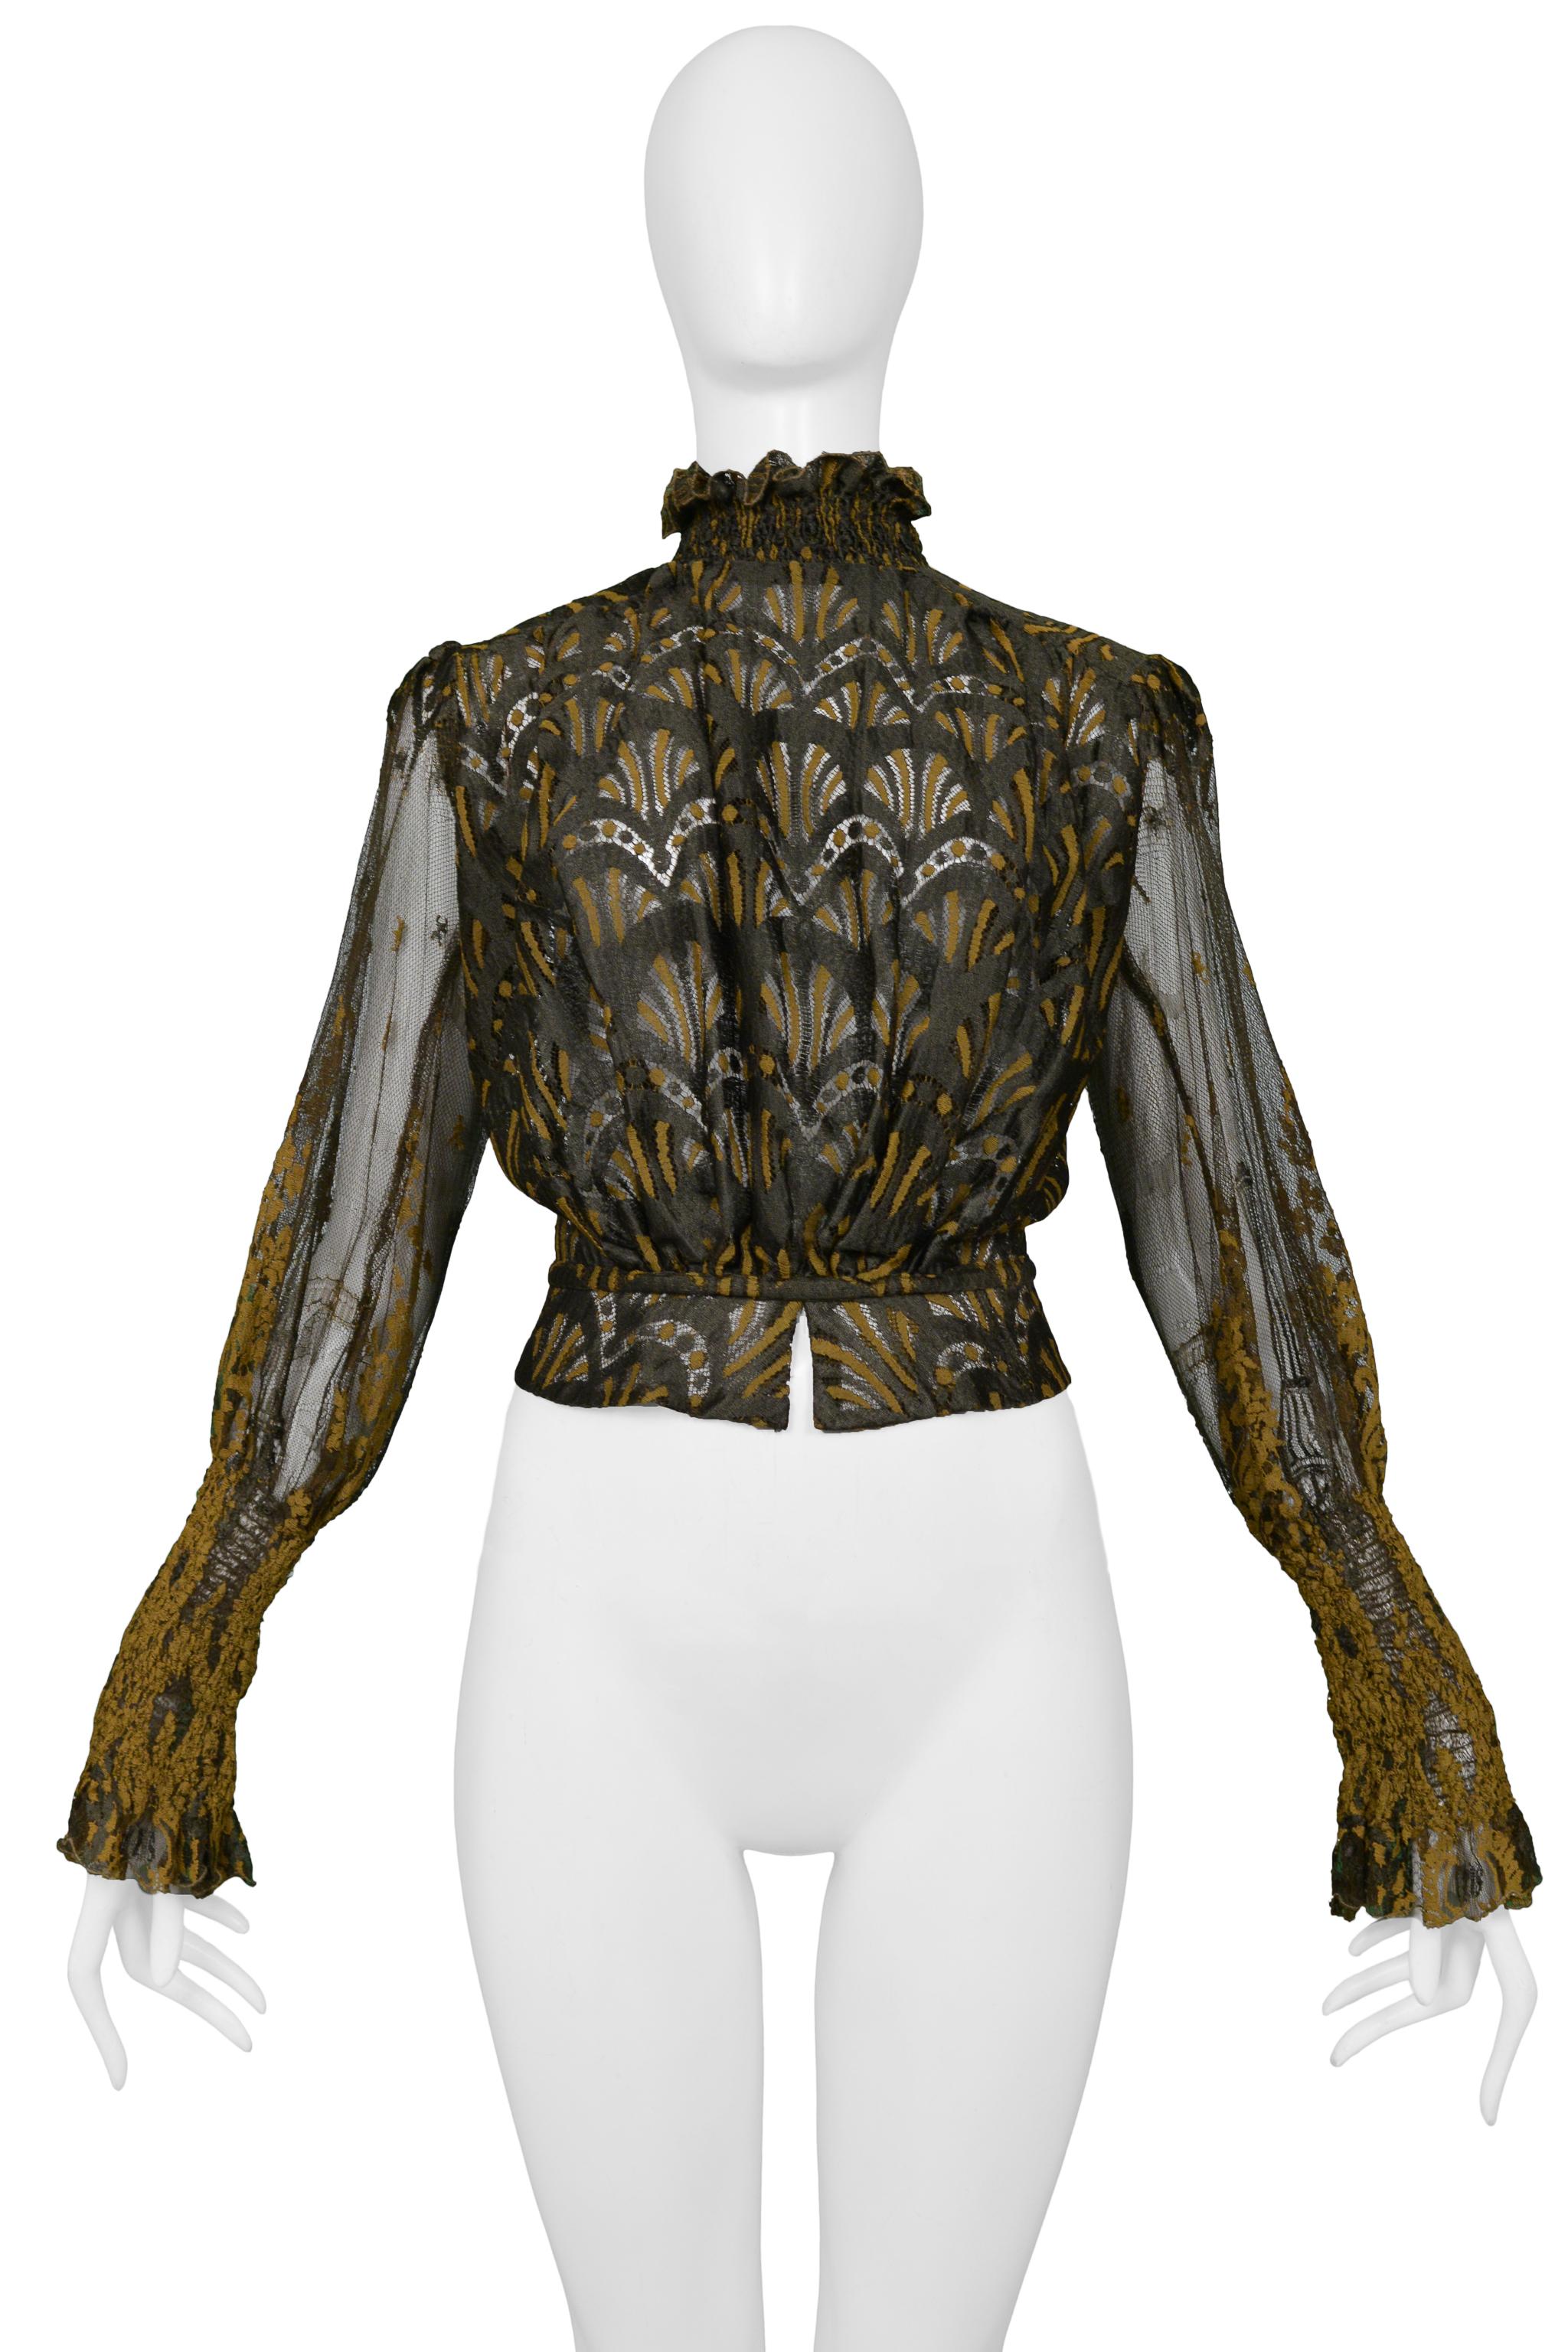 Black Jean Paul Gaultier Brown Lace Blouse W Puff Sleeves  SS 1995 For Sale